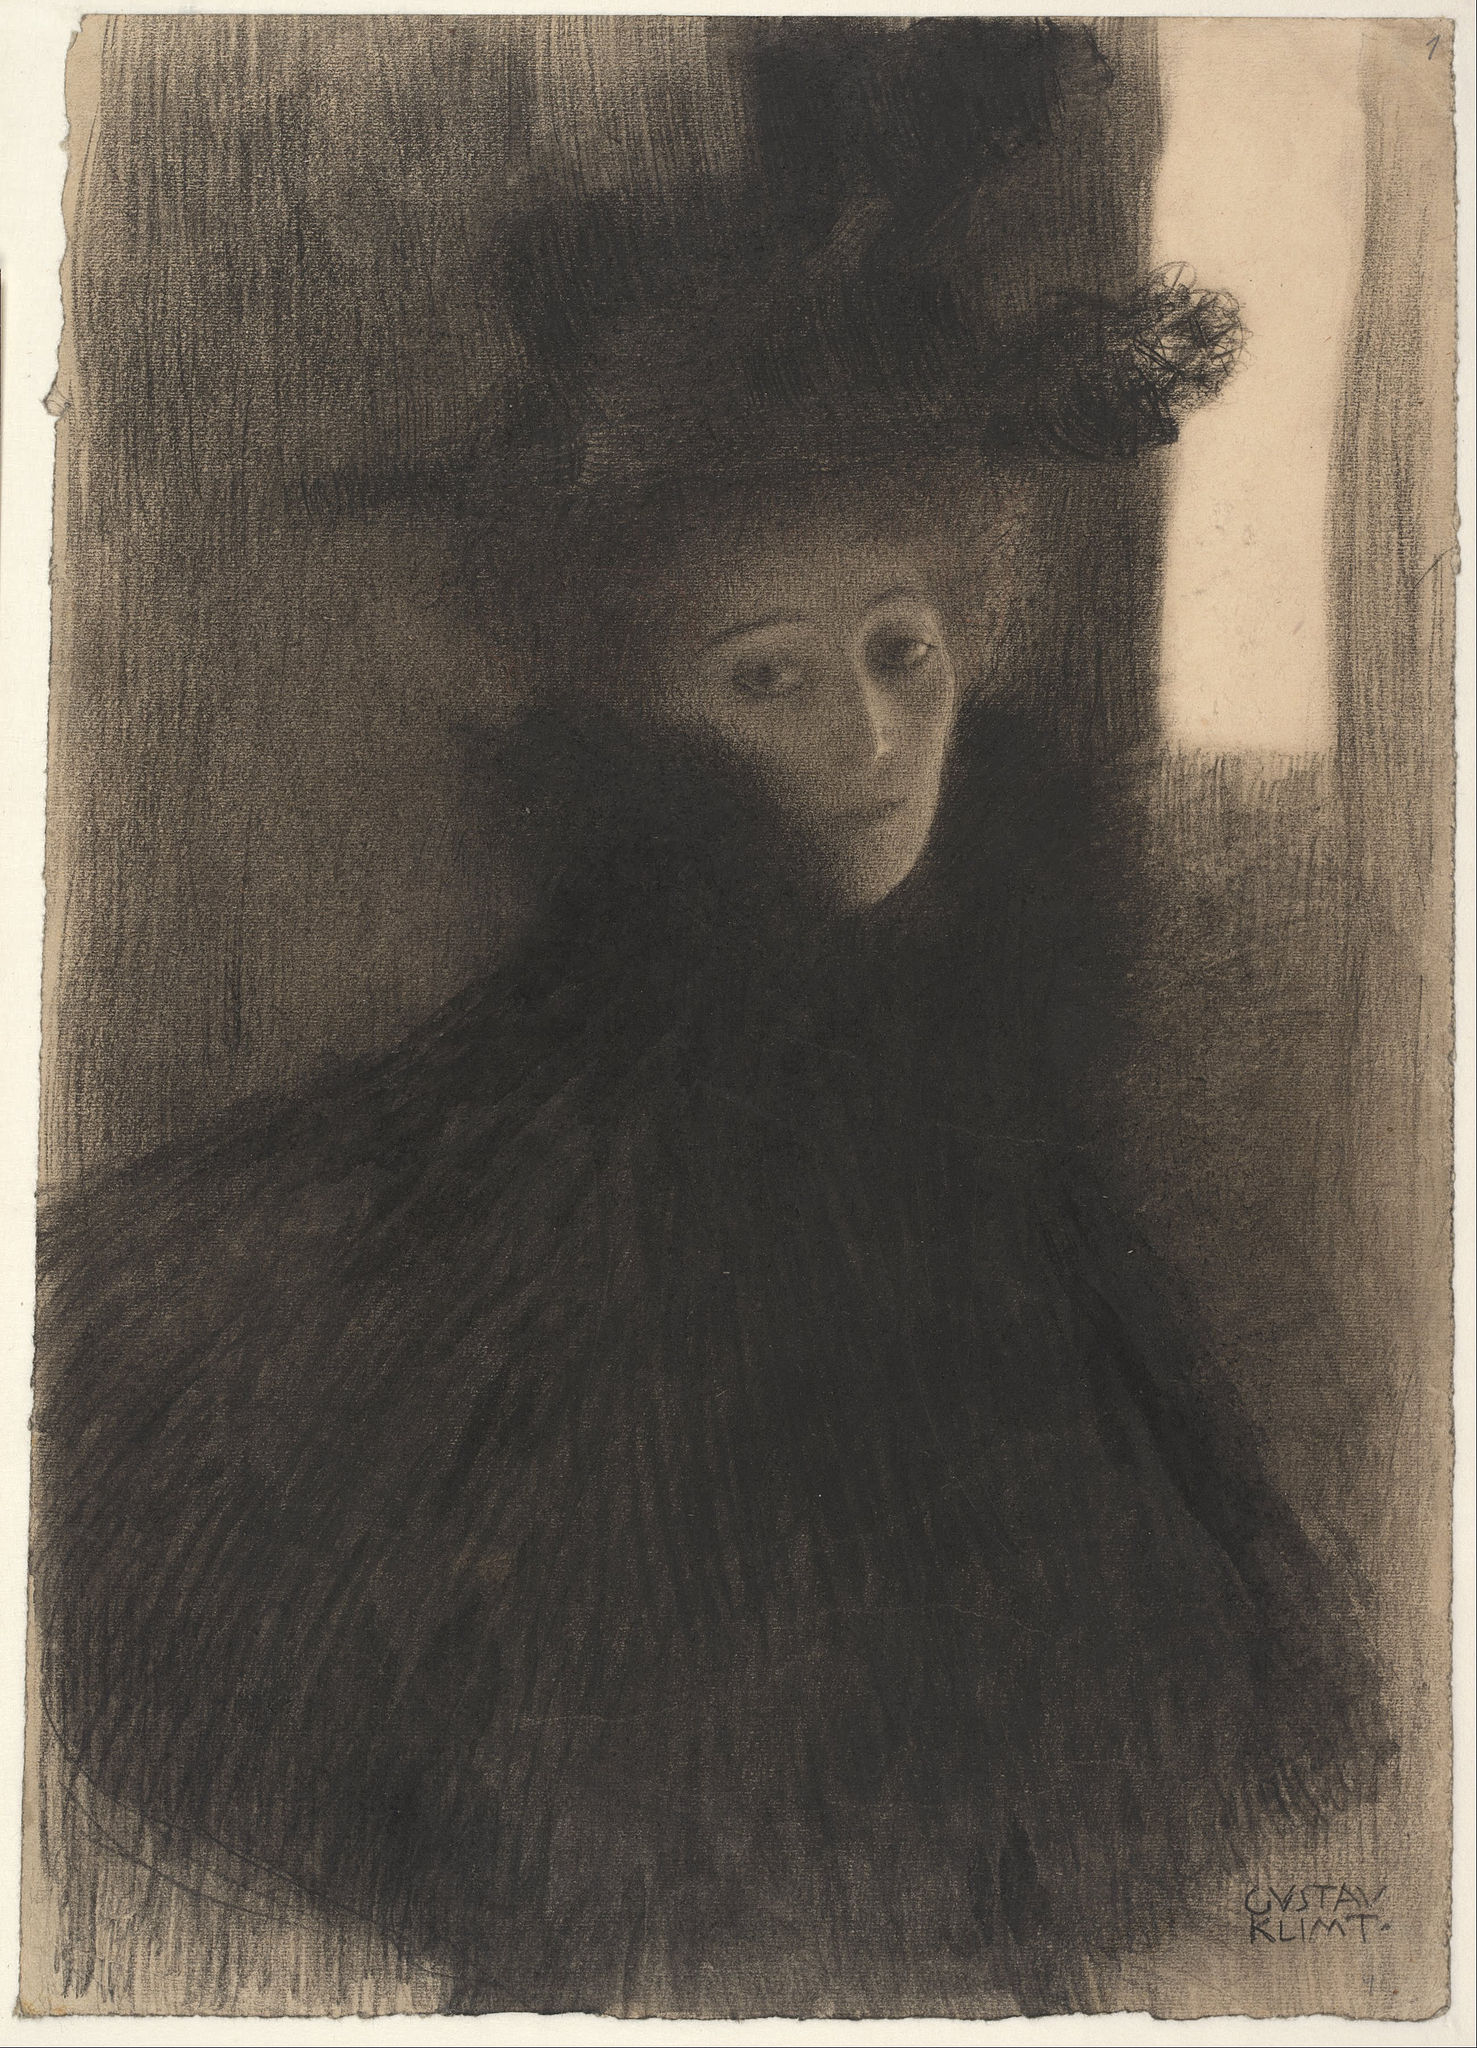 File:Gustav Klimt - Portrait of a Lady with Cape and Hat, 1897-1898 -  Google Art Project.jpg - Wikipedia